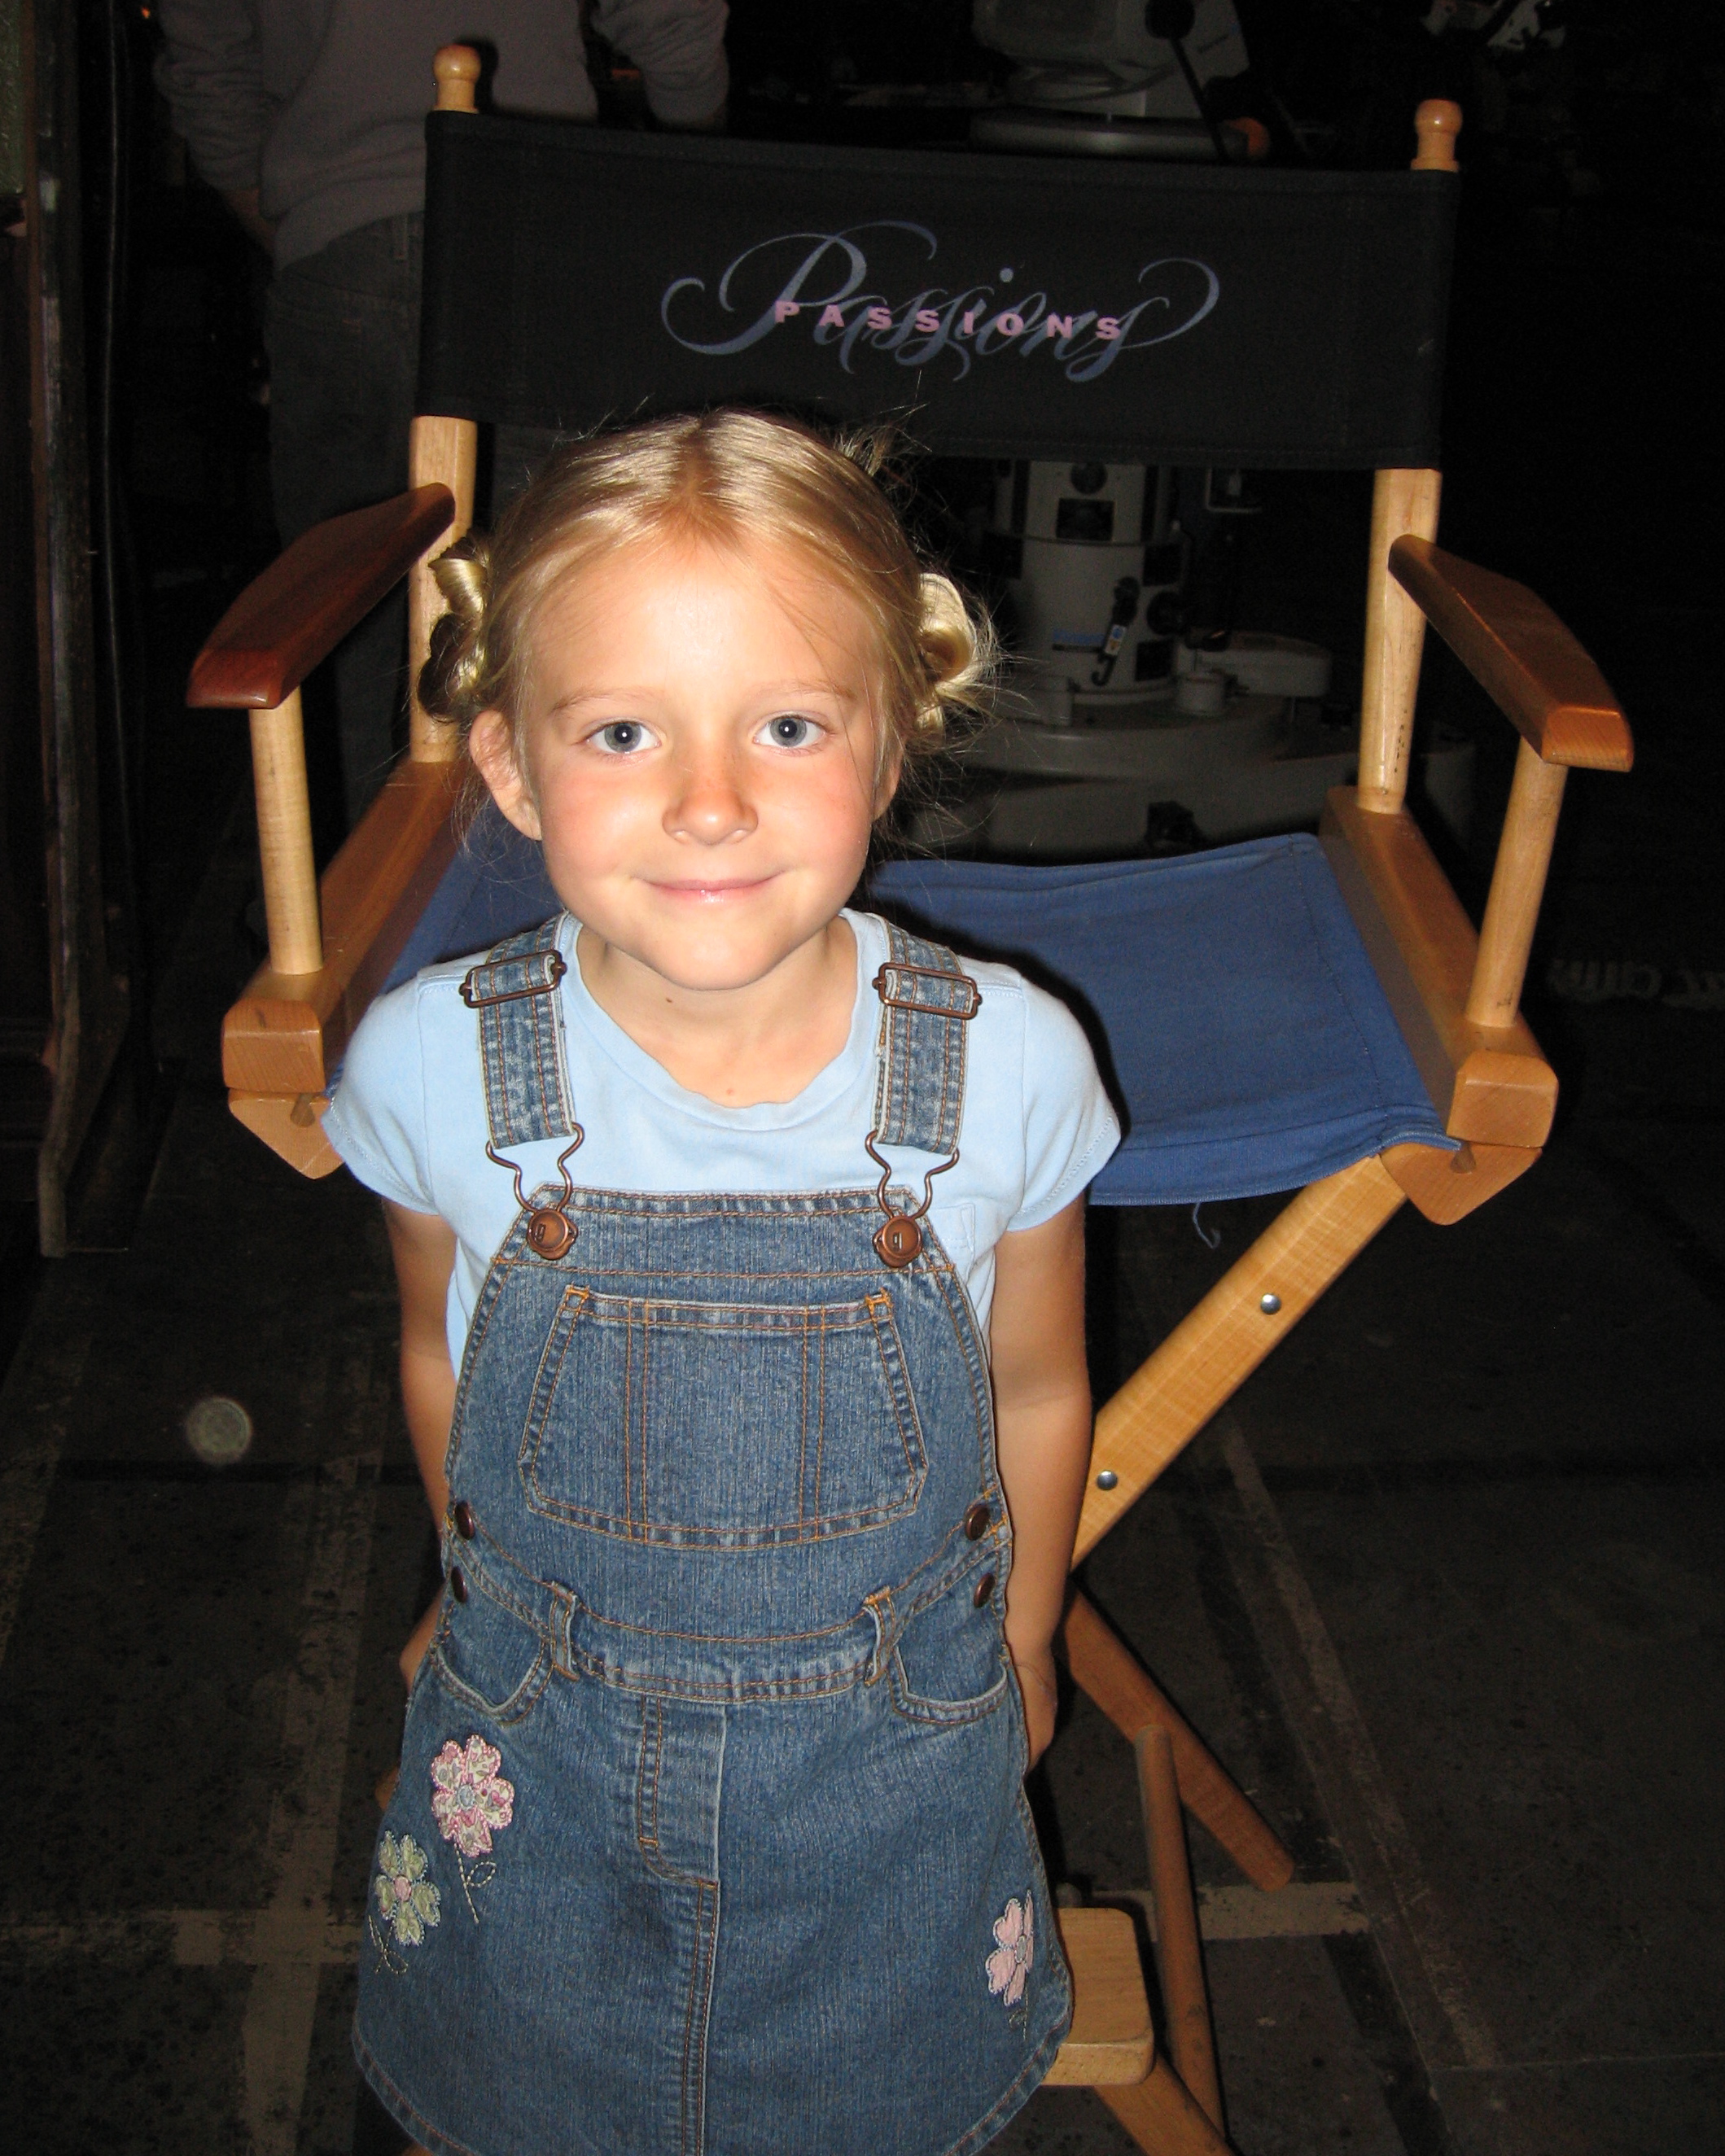 Carly on the set of Passions April 2007